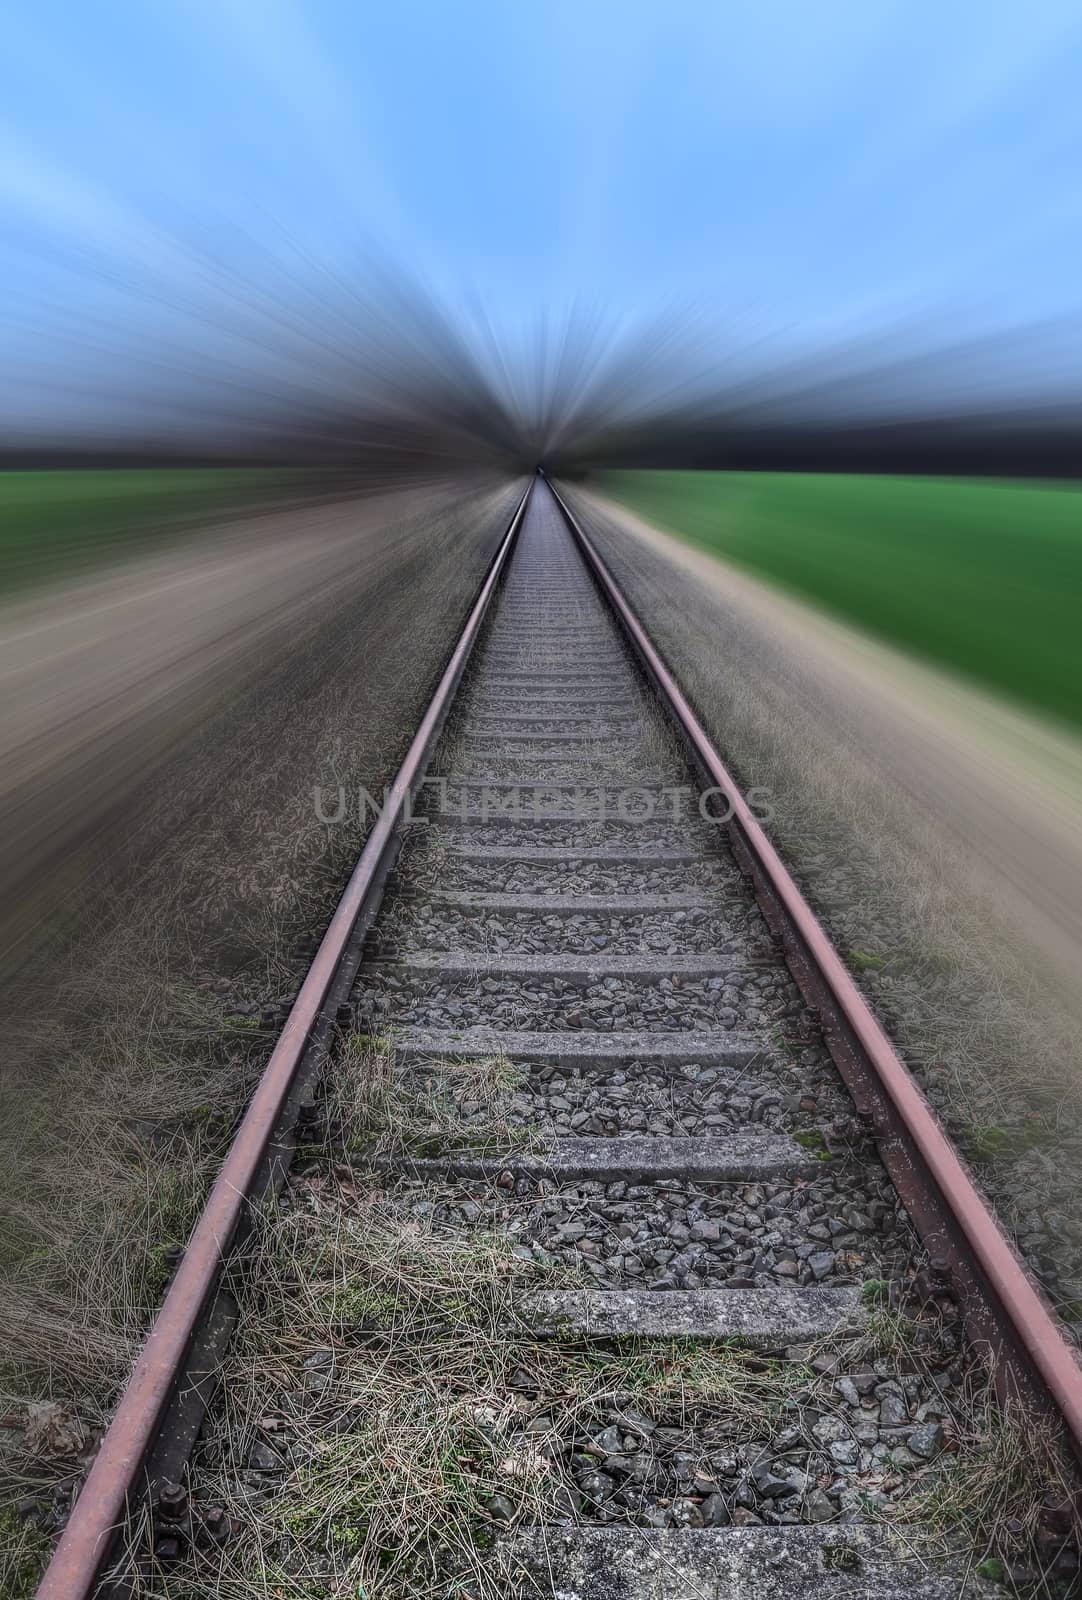 Diminishing perspective view at a railroad track with high speed motion blur